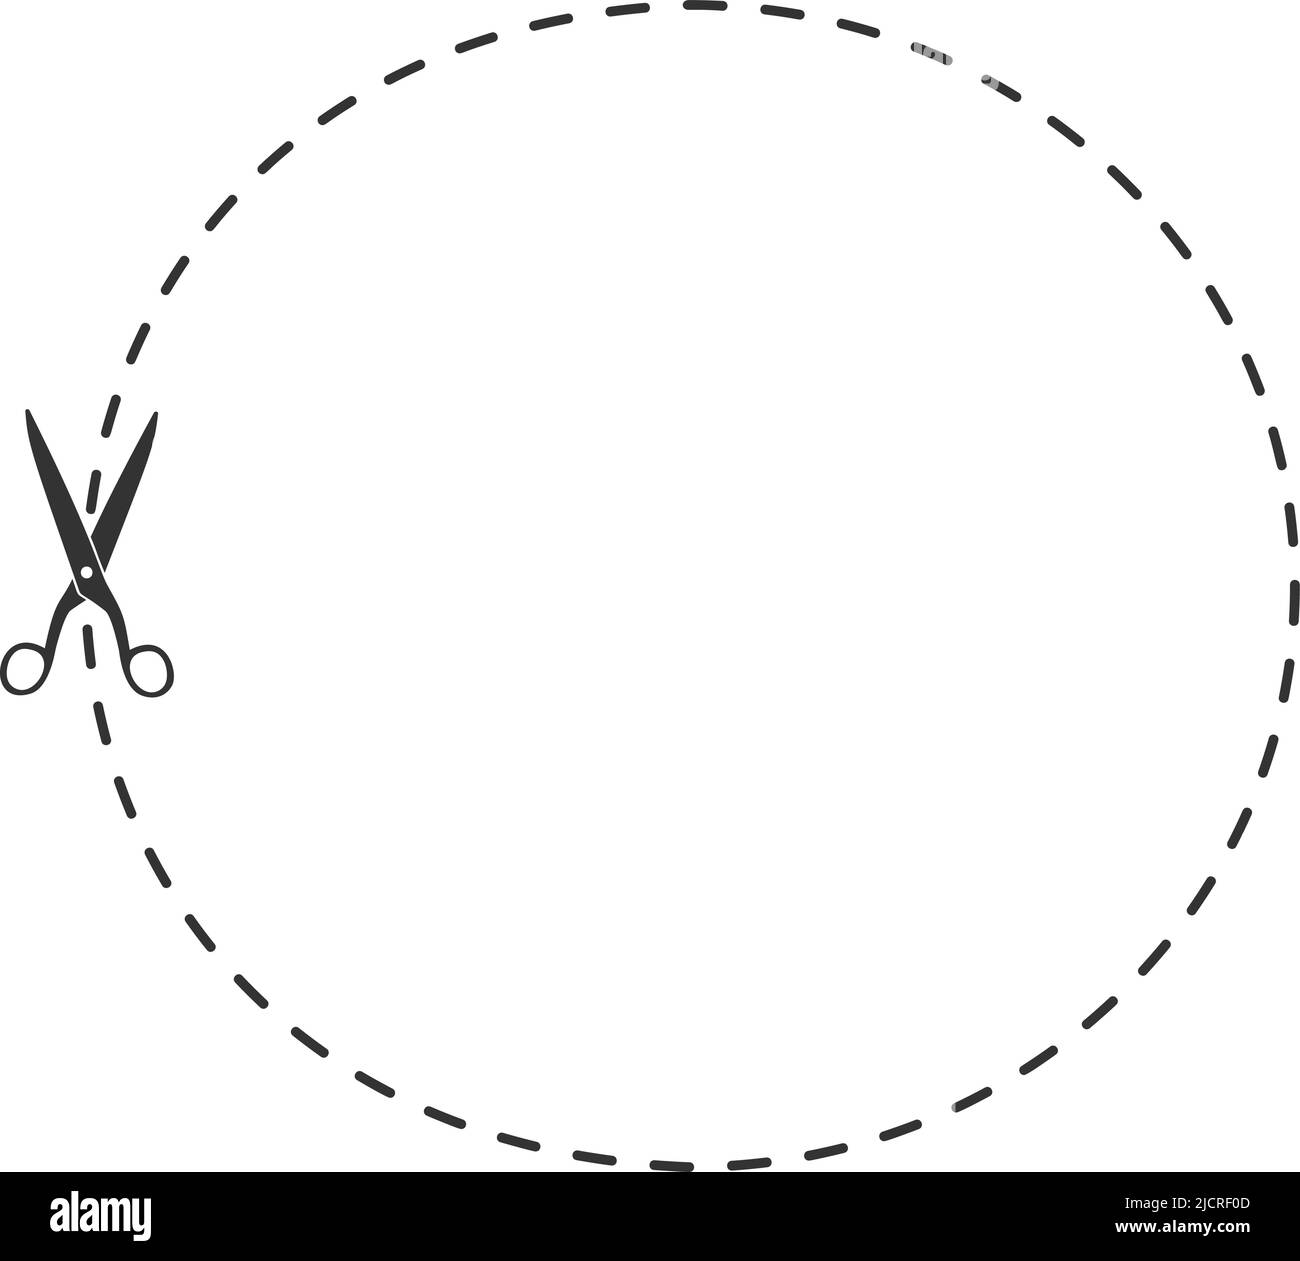 circular dashed cut out line with scissors, coupon border template vector illustration Stock Vector